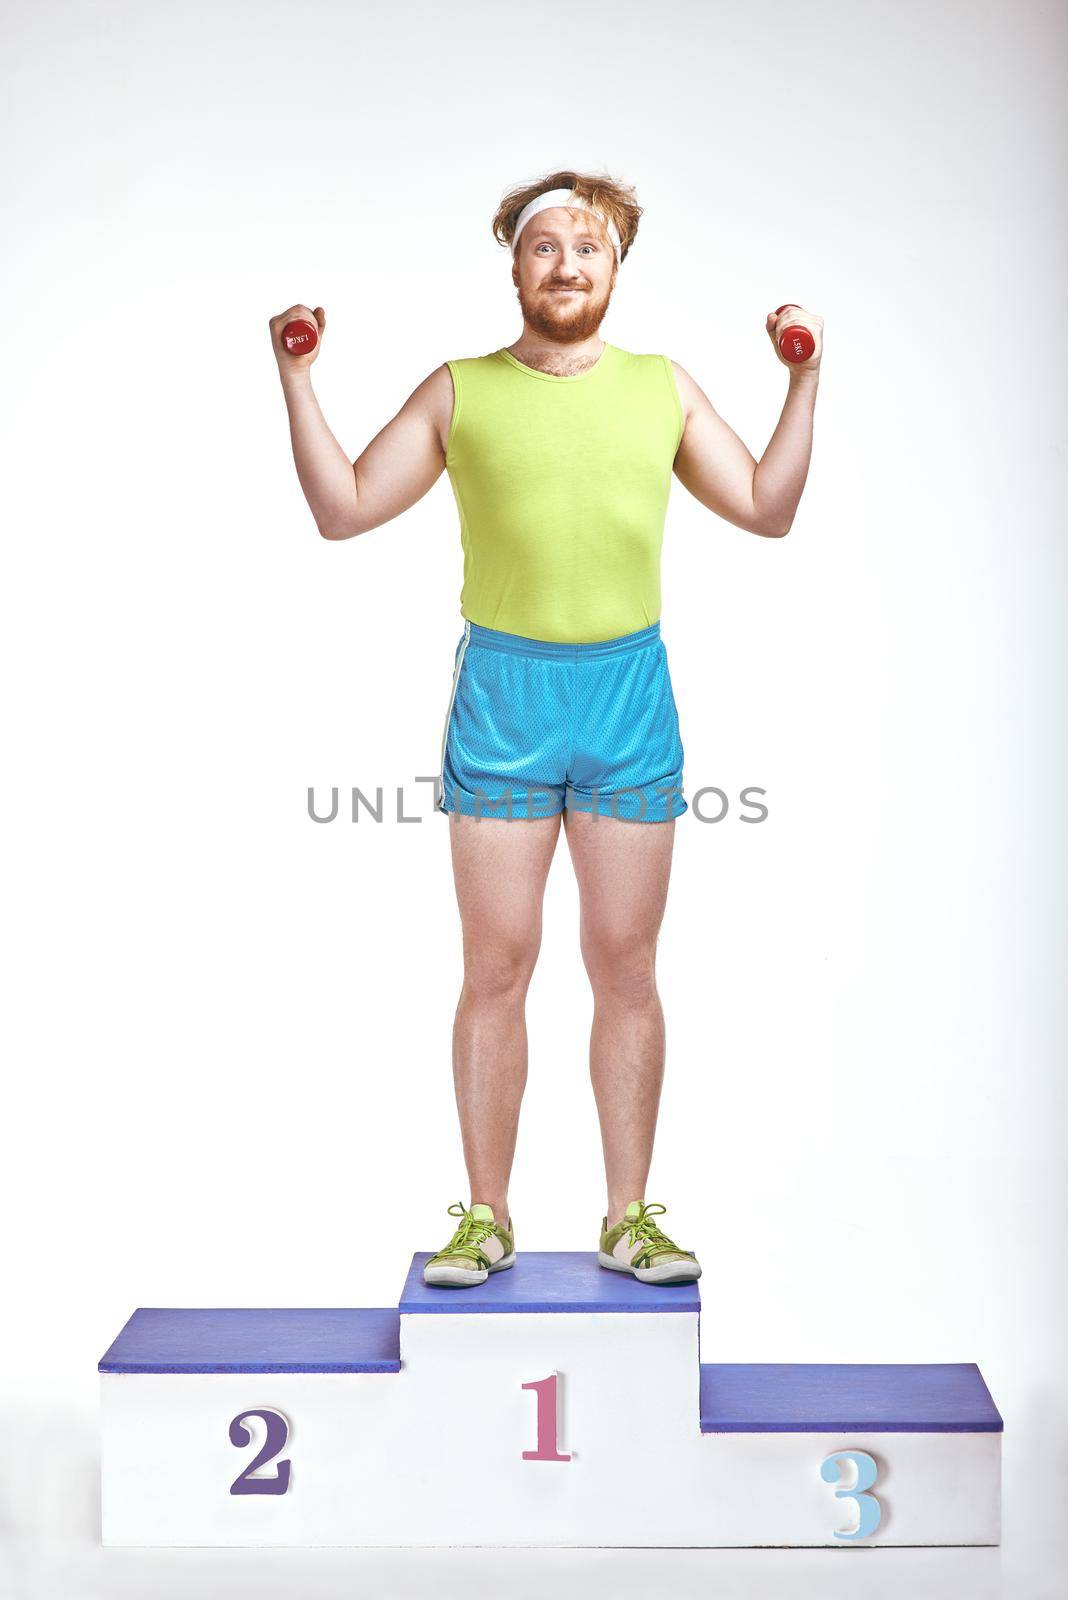 Red haired, bearded, plump man is standing on a pedestal by friendsstock